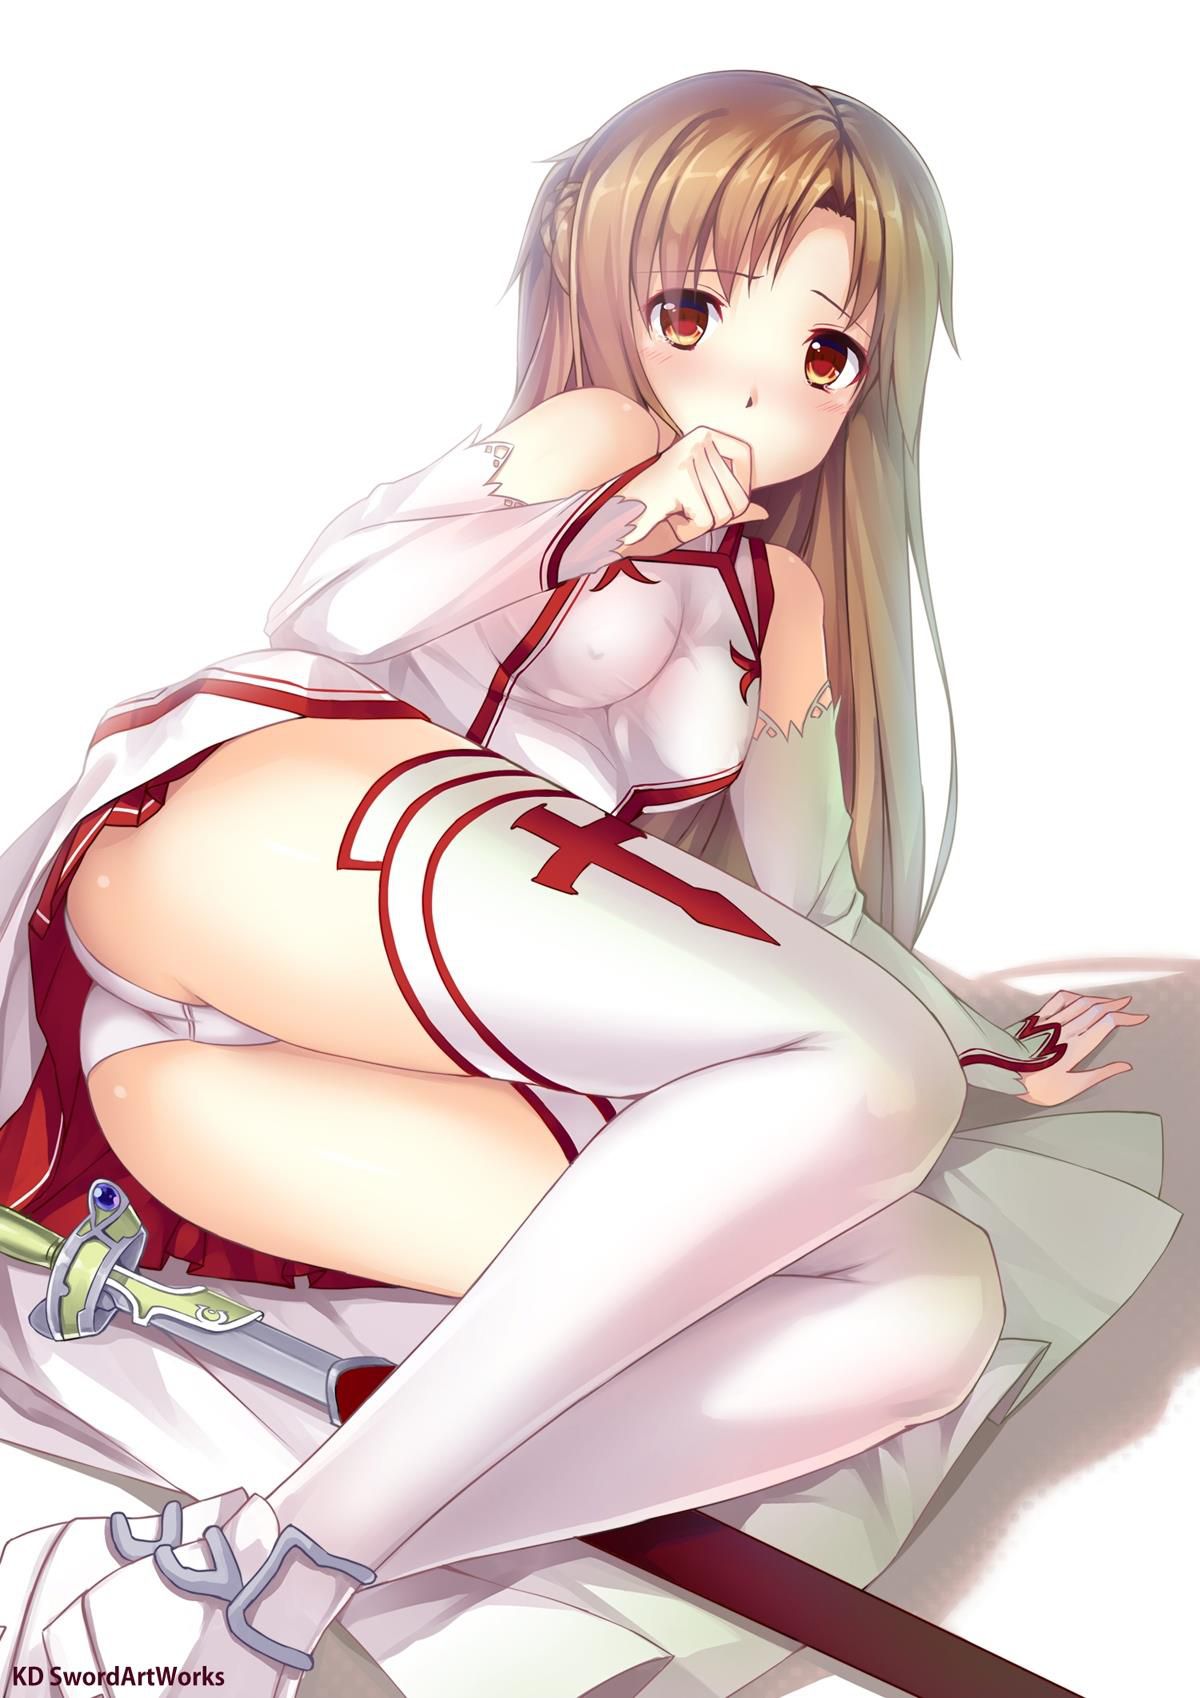 Favorite all is an eroticism image of the SORD art online. vol.2 41